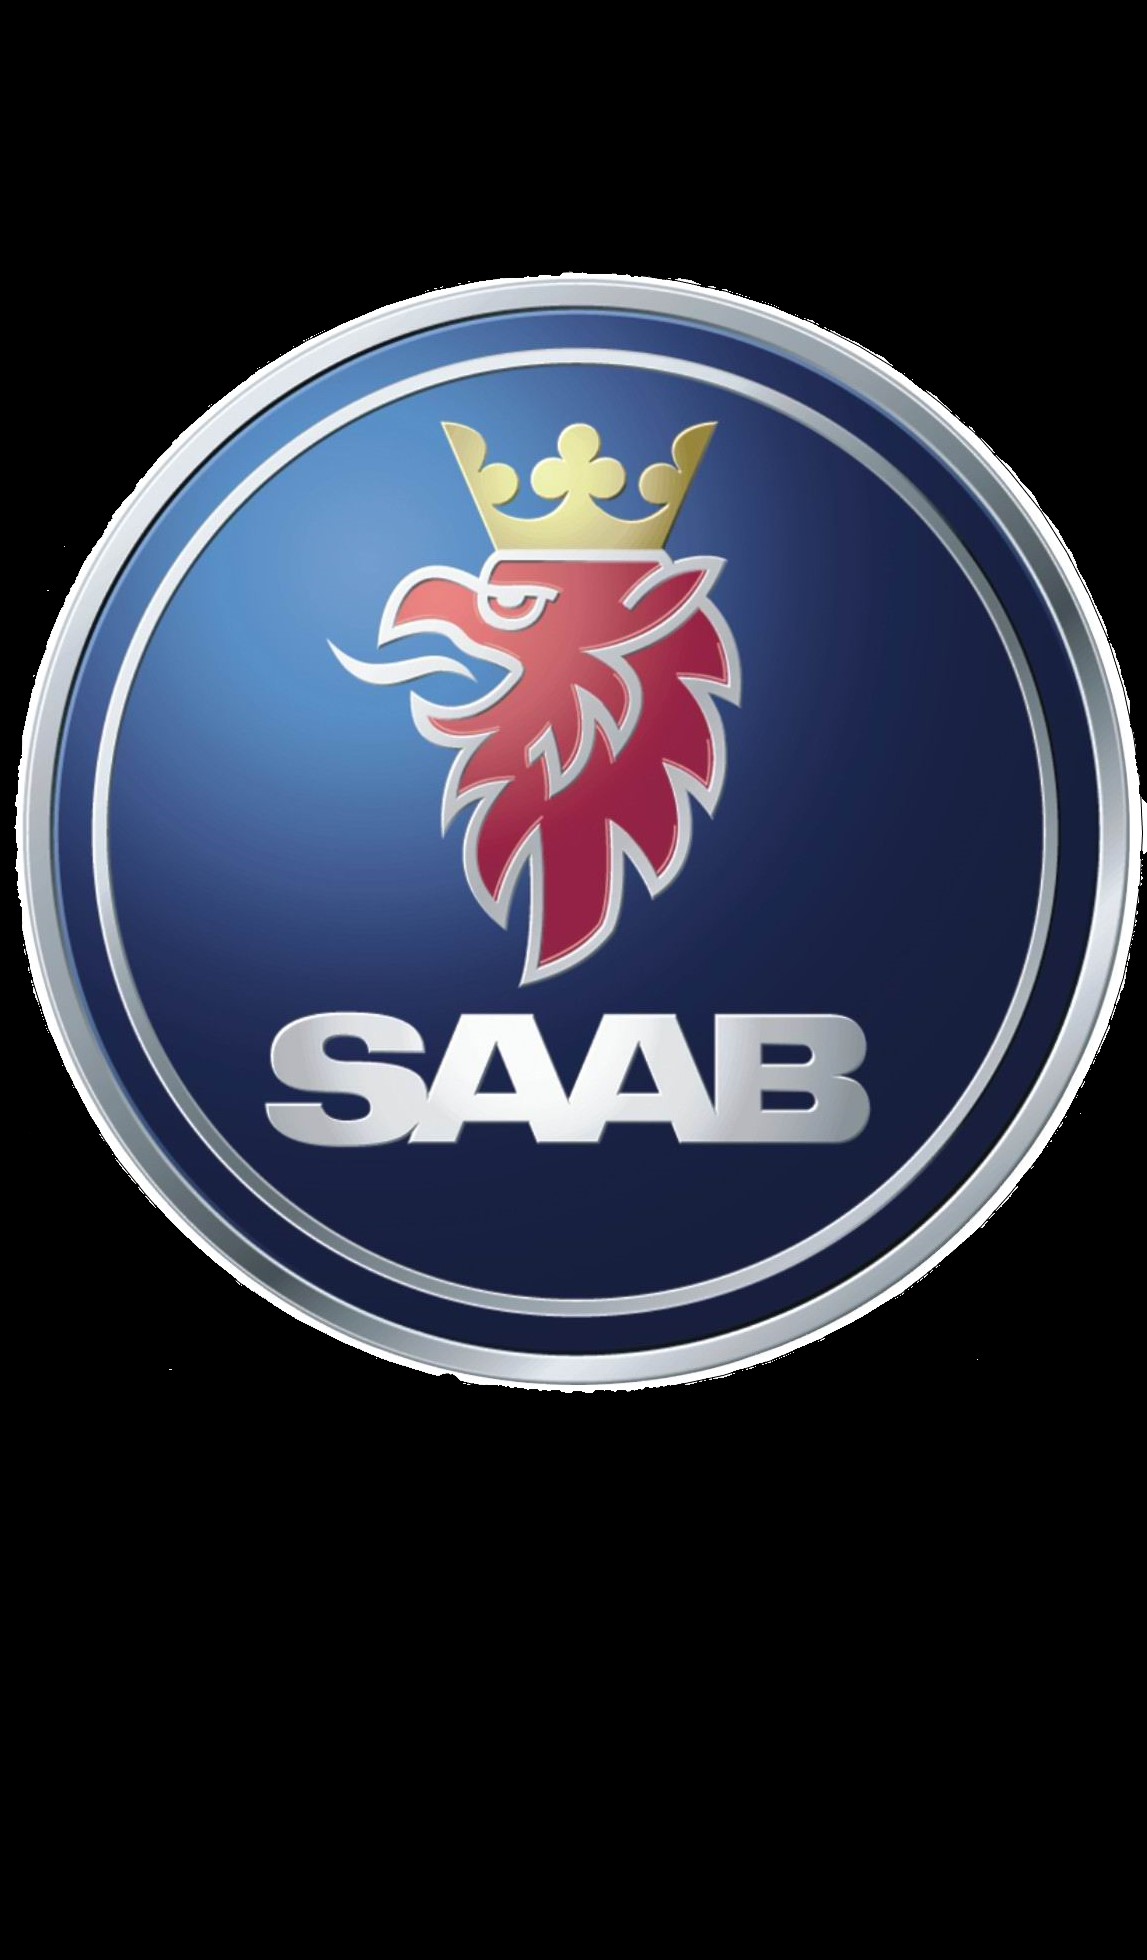 Saab Specialists for 40 years